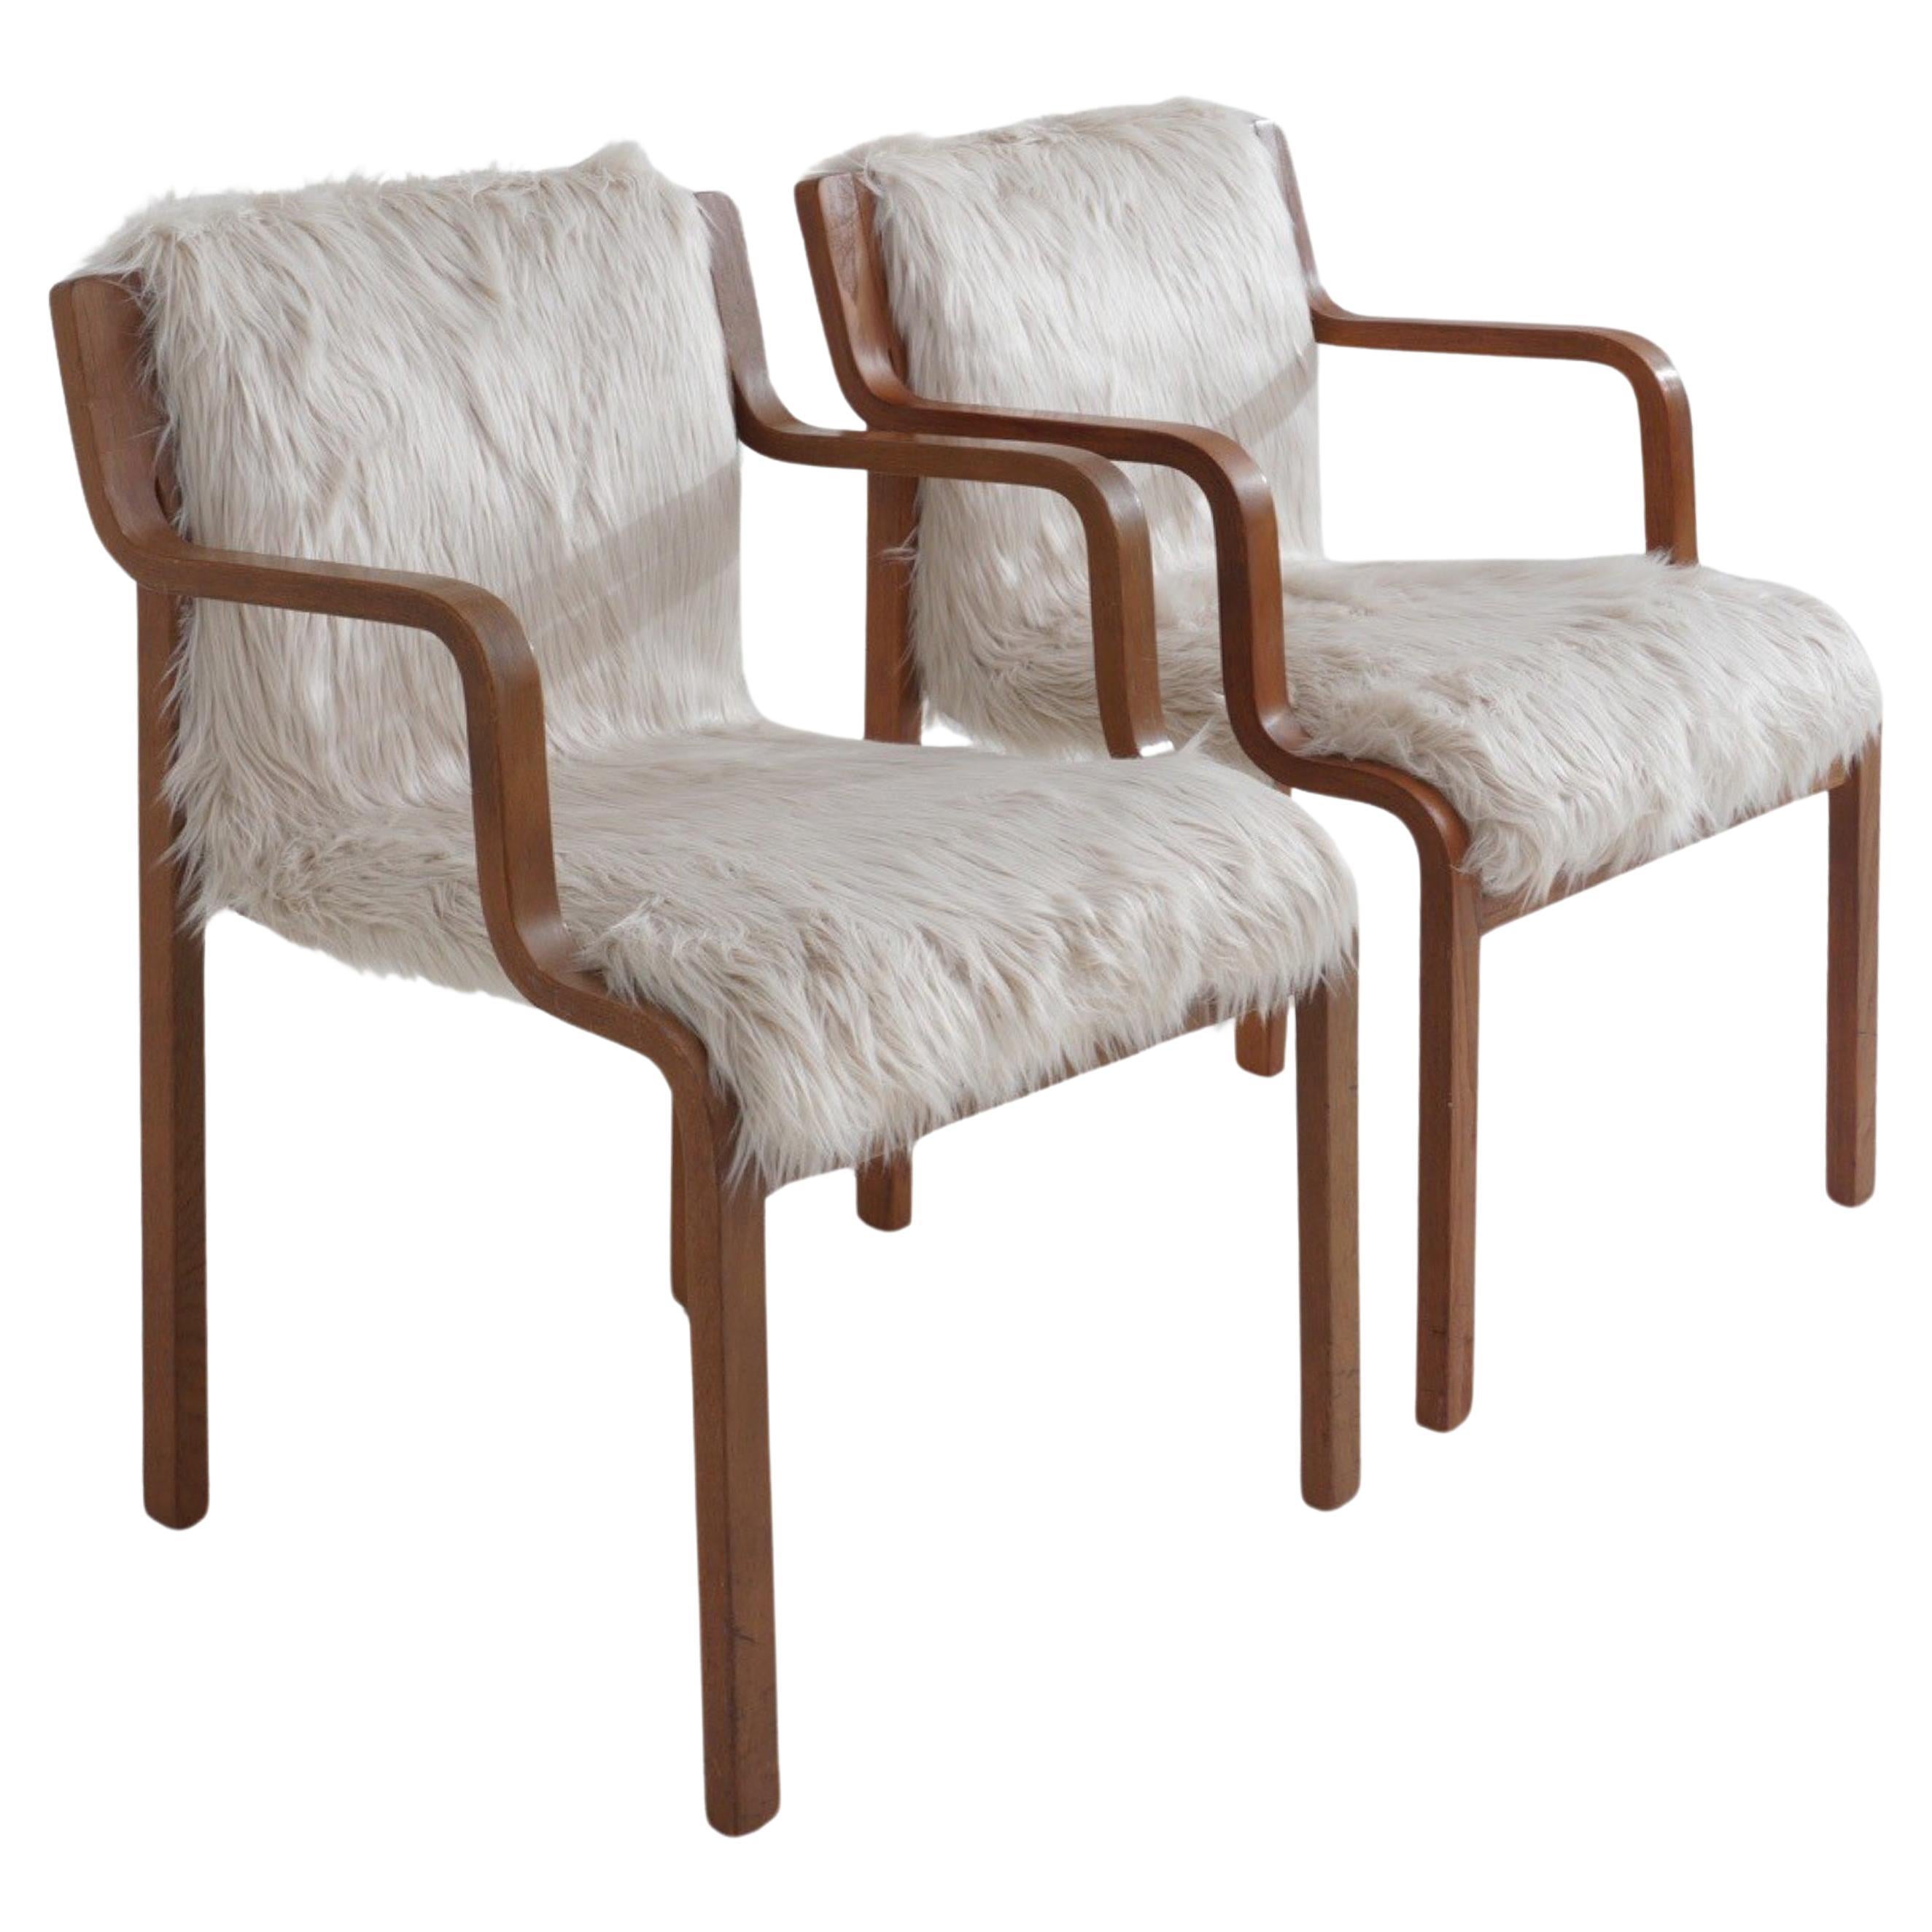 Pair of Swedish Bentwood Chairs by Stendig, 1960s For Sale